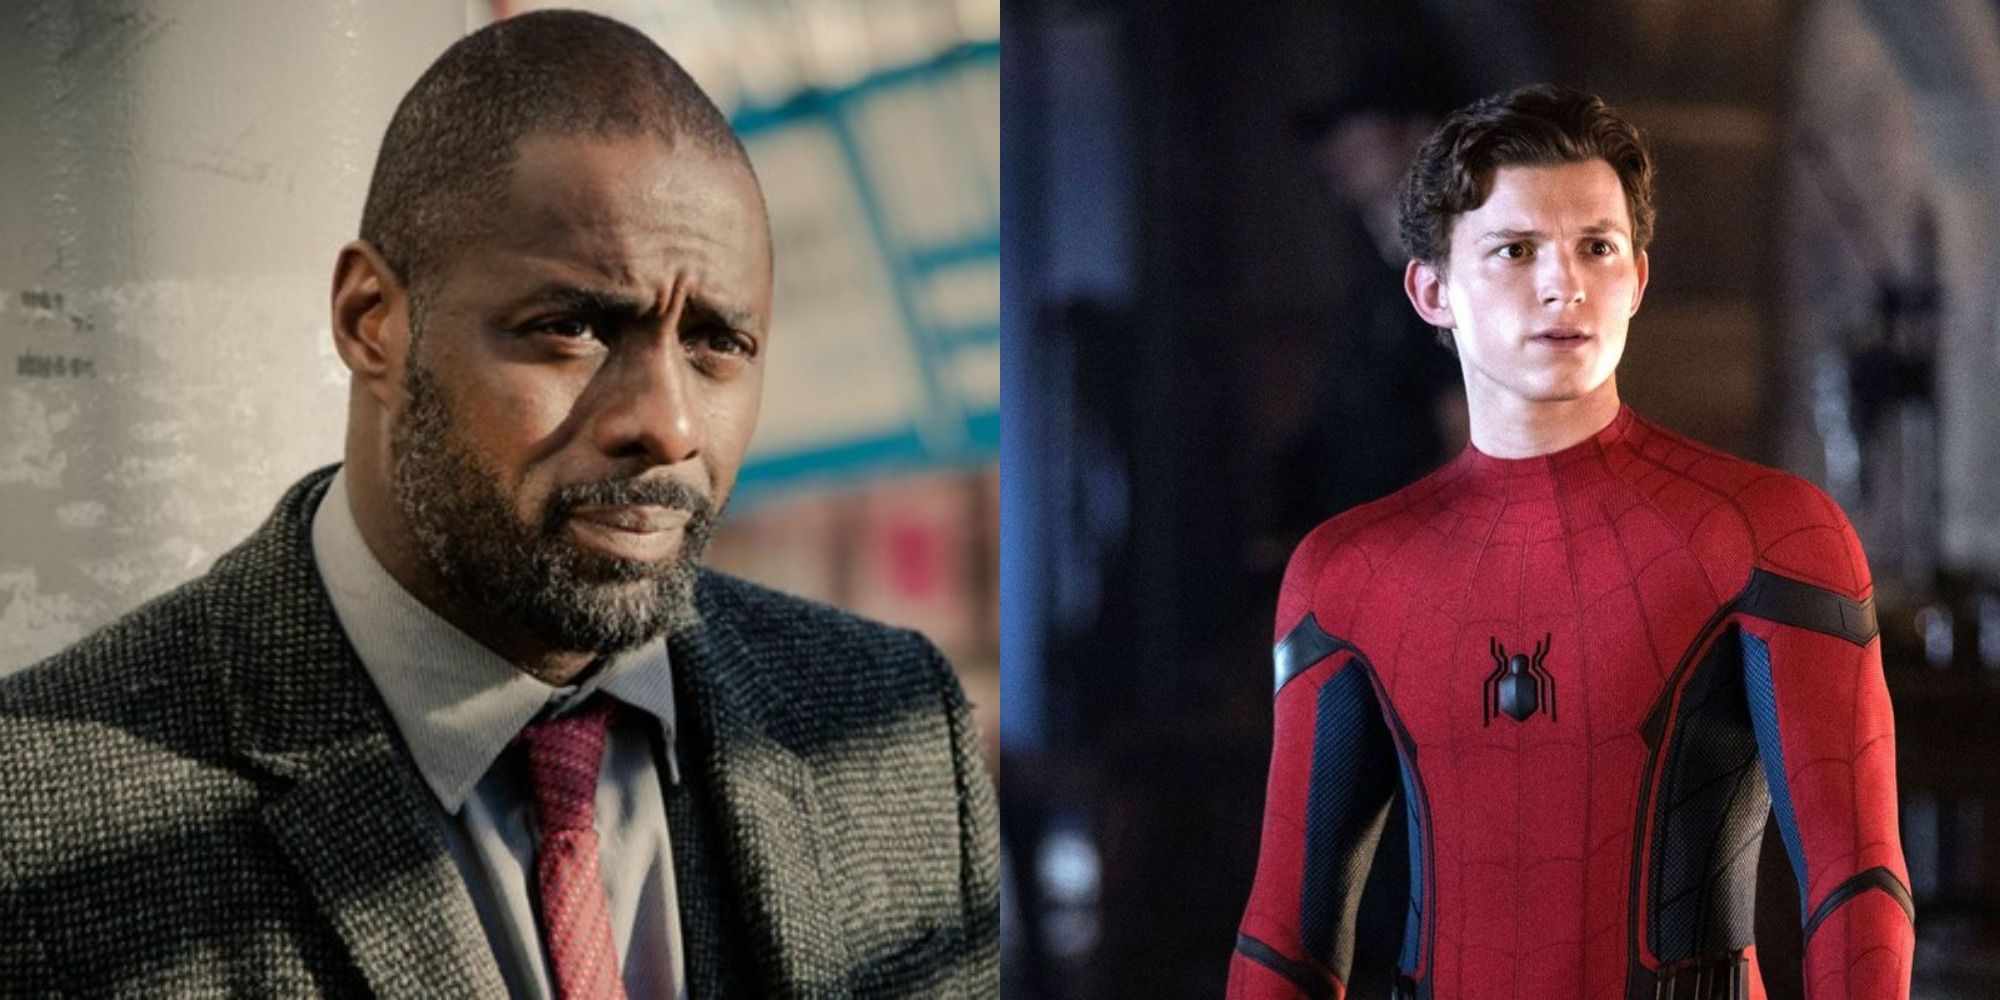 A split image of Idris Elba as Luther and Tom Holland as Spider-Man